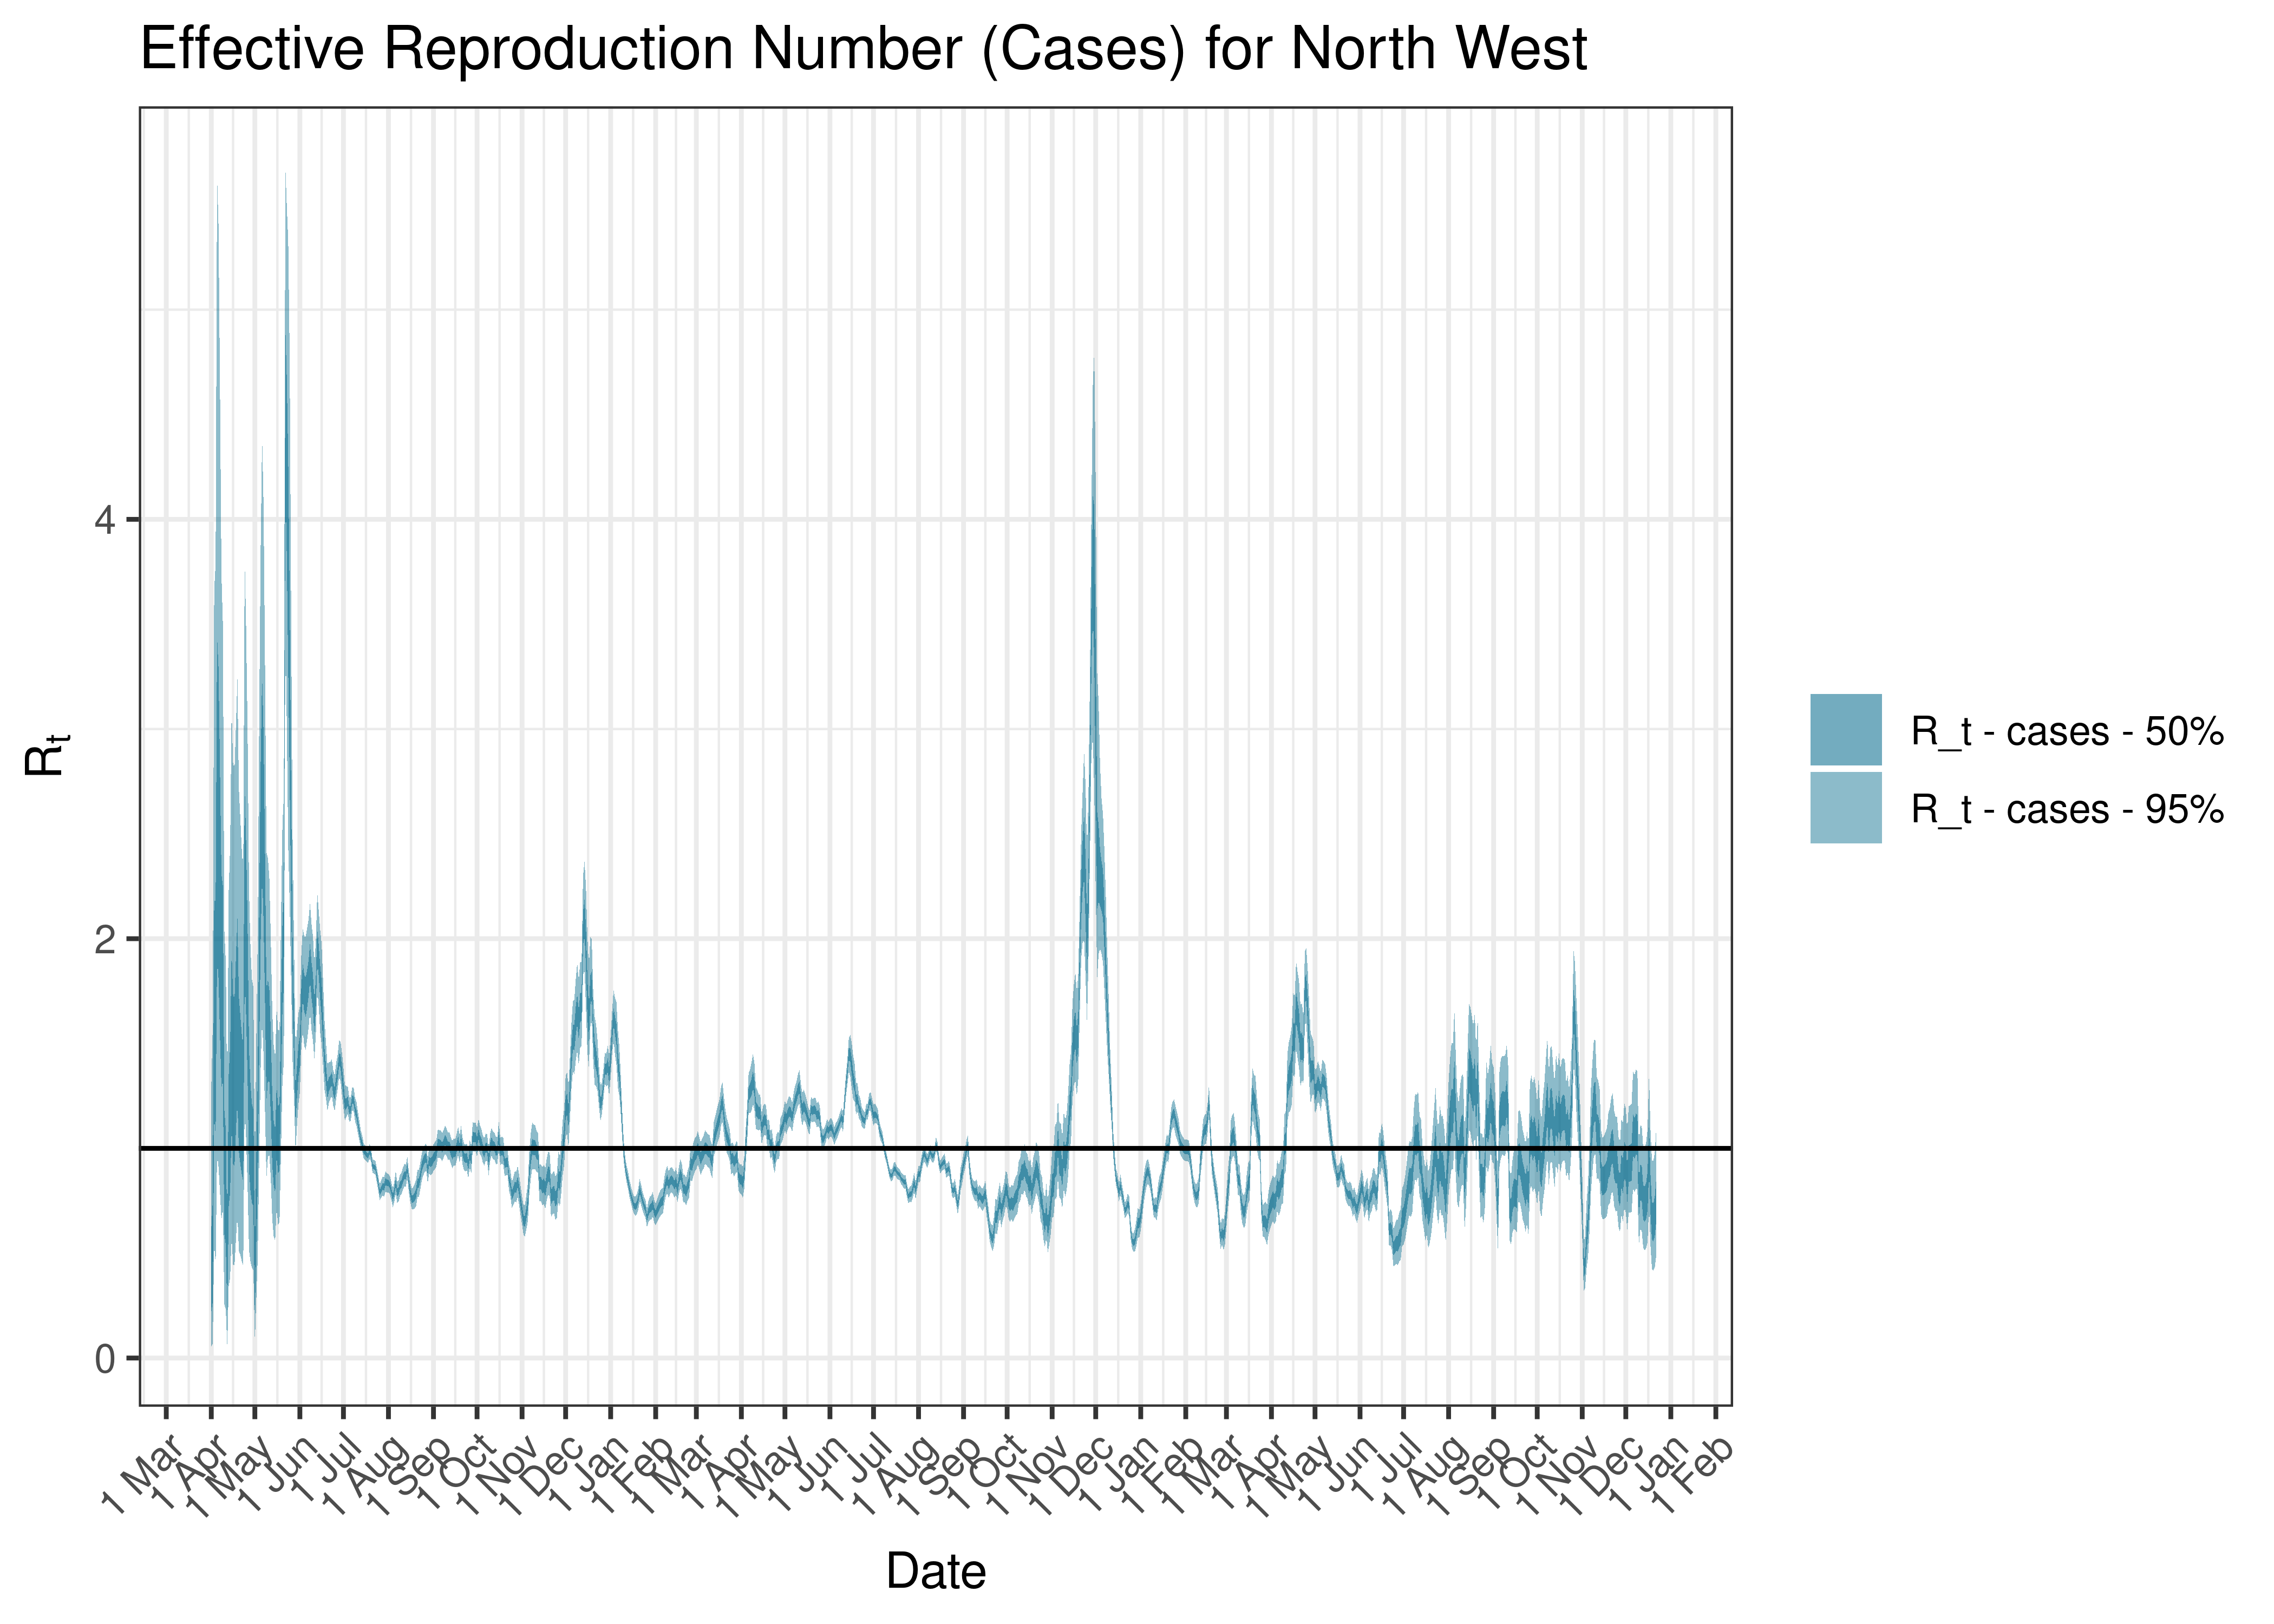 Estimated Effective Reproduction Number Based on Cases for North West since 1 April 2020